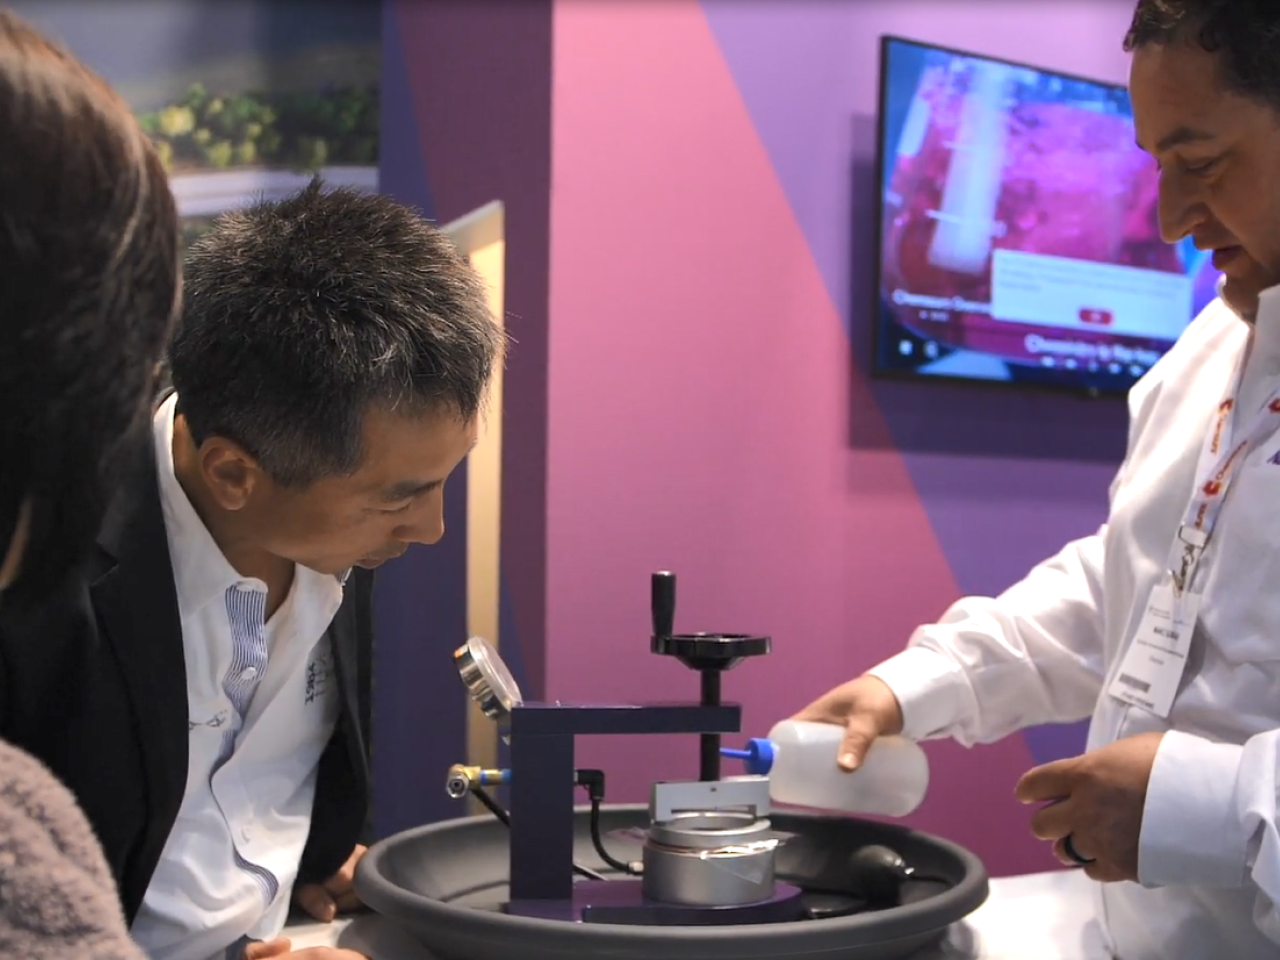 A Chemours employee demonstrating Nafion at a convention.